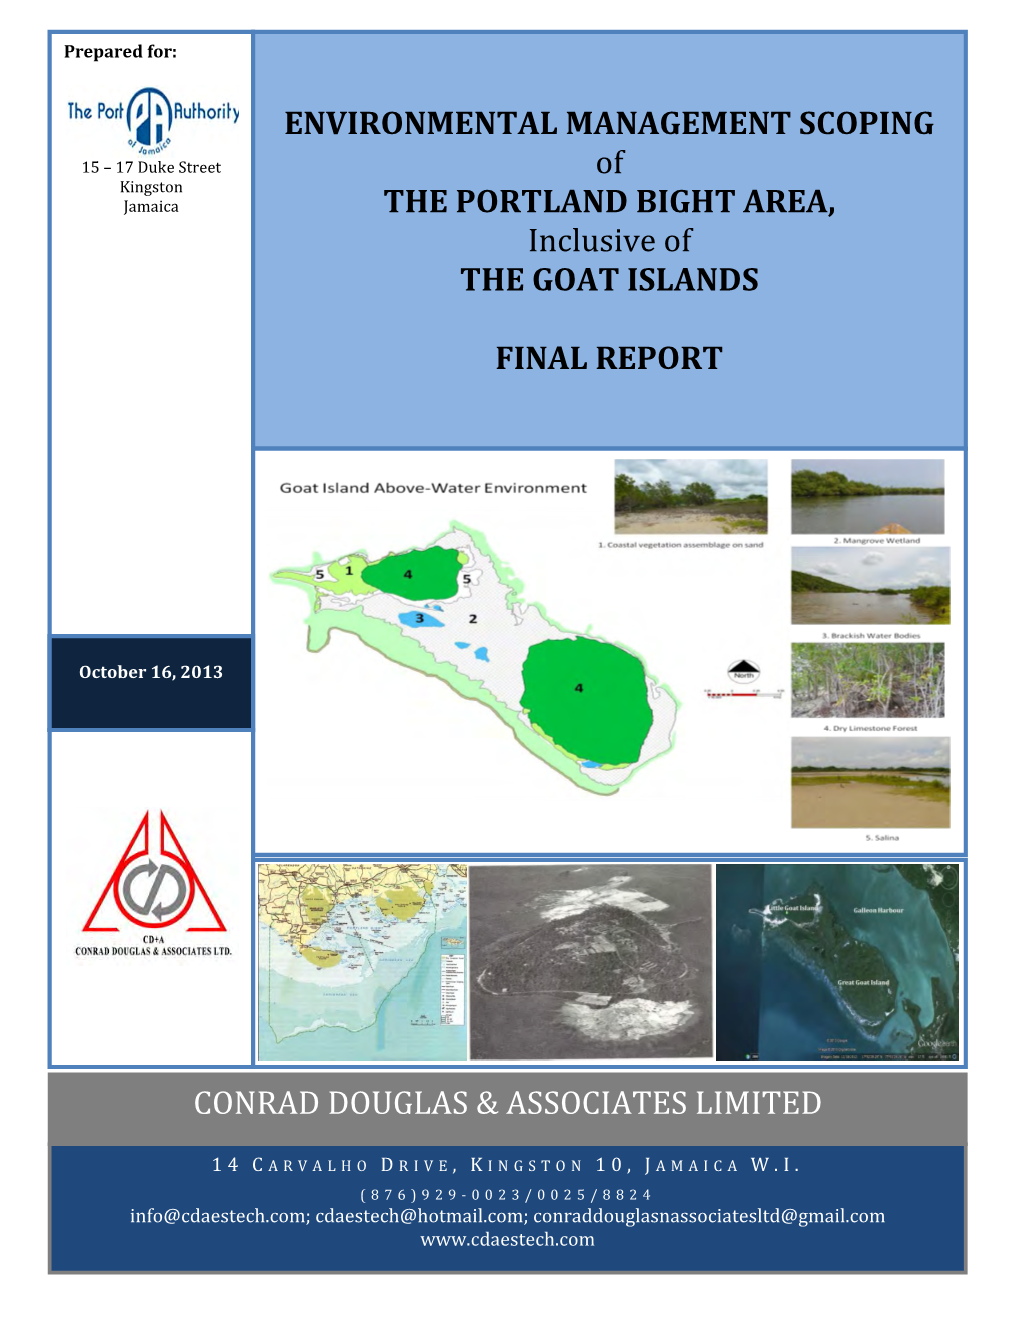 ENVIRONMENTAL MANAGEMENT SCOPING of the PORTLAND BIGHT AREA, Inclusive of the GOAT ISLANDS